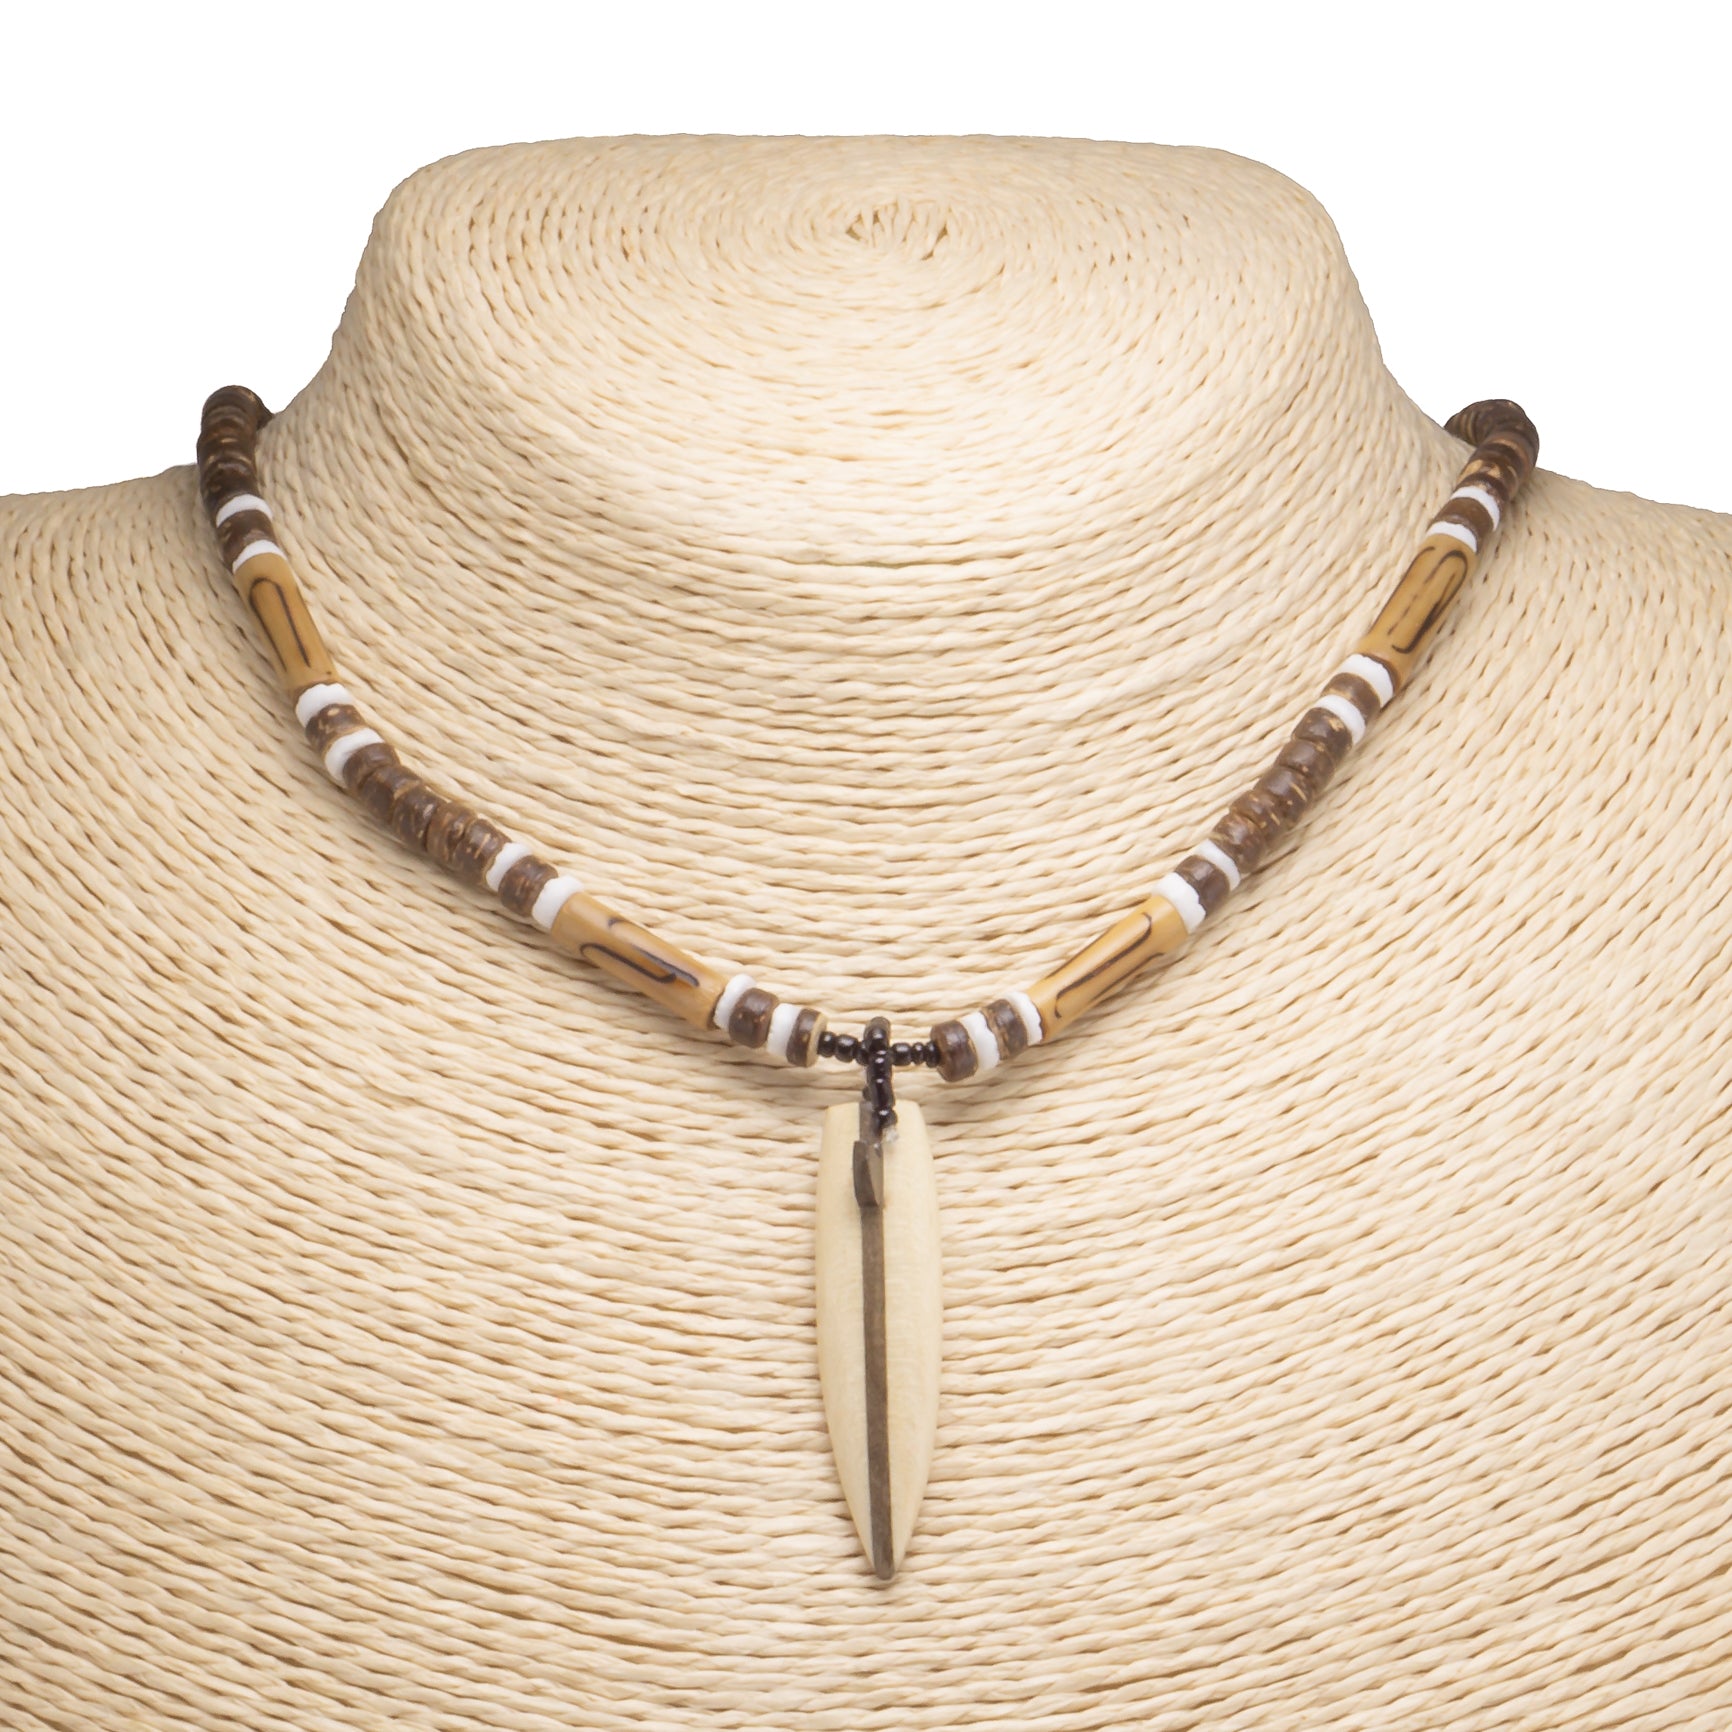 Wood Surfboard Pendant on Brown Coconut Beads Necklace